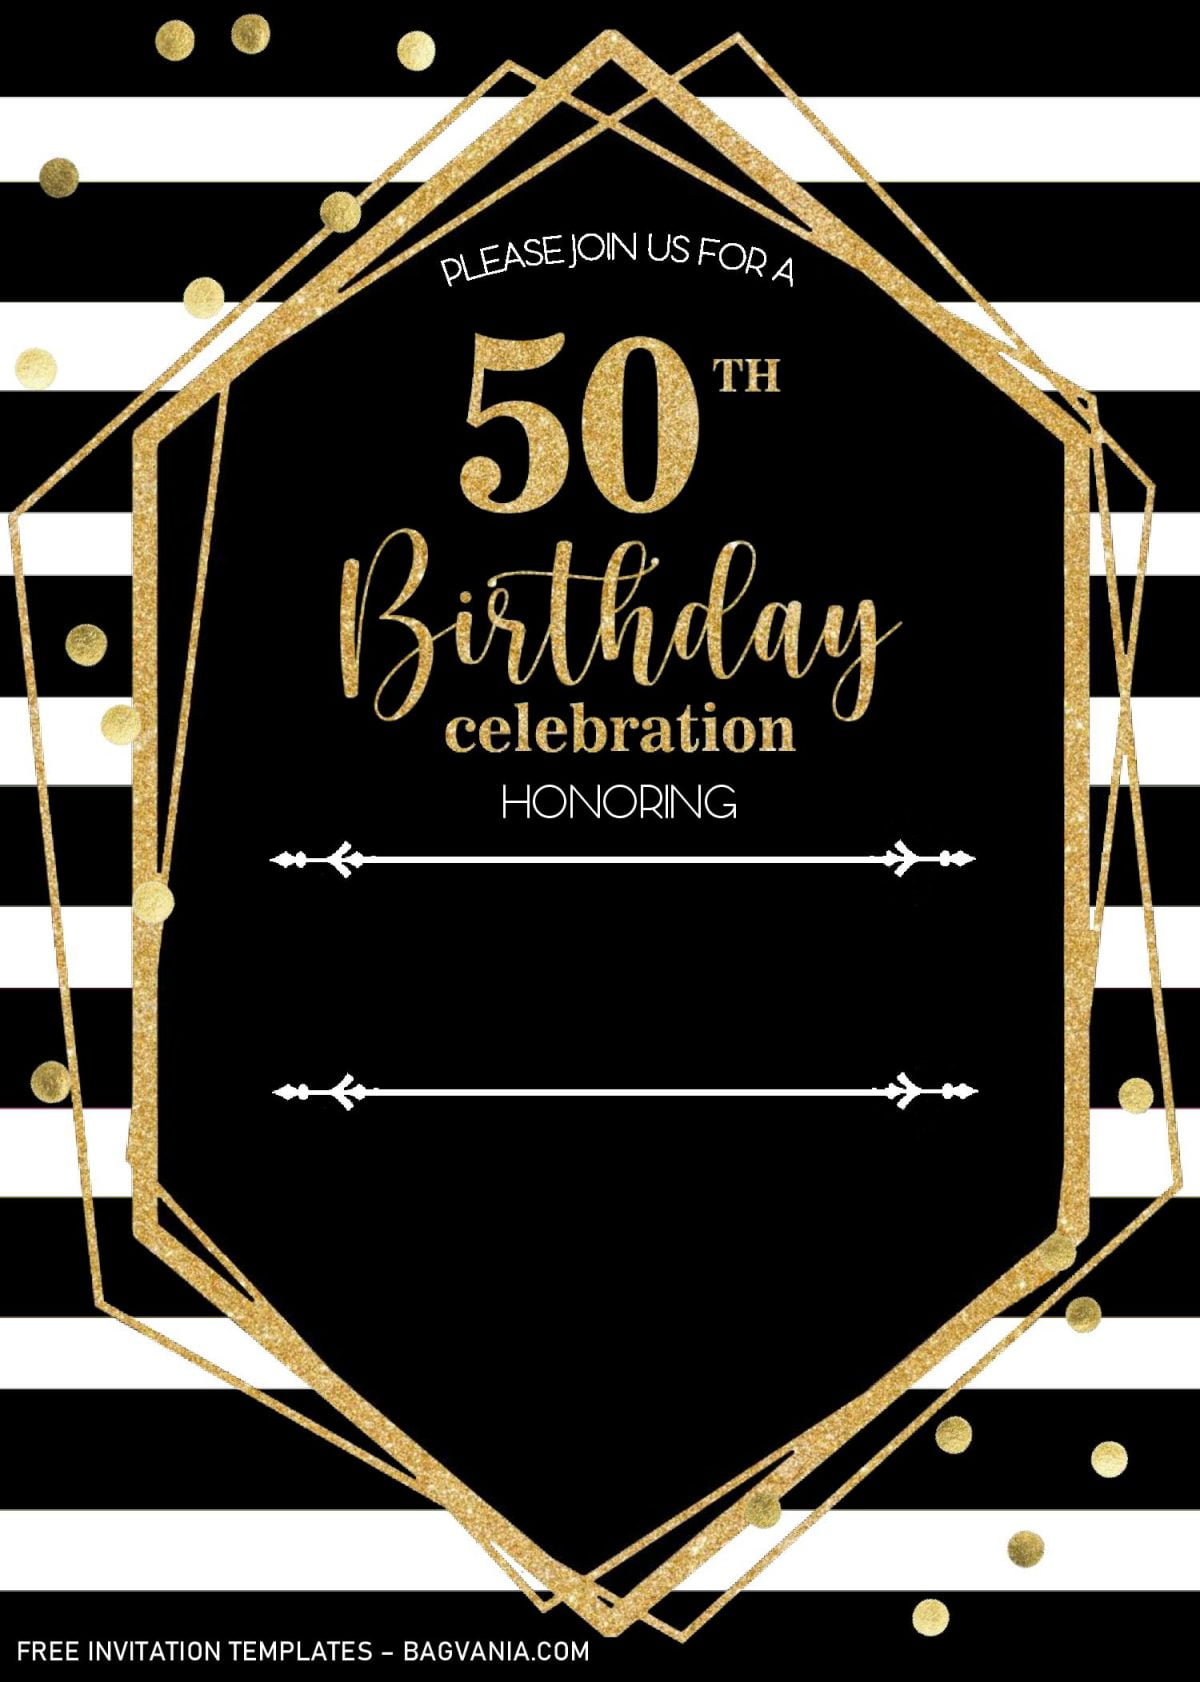 Black And Gold 50th Birthday Invitation Templates - Editable With MS Word and has Black and White background